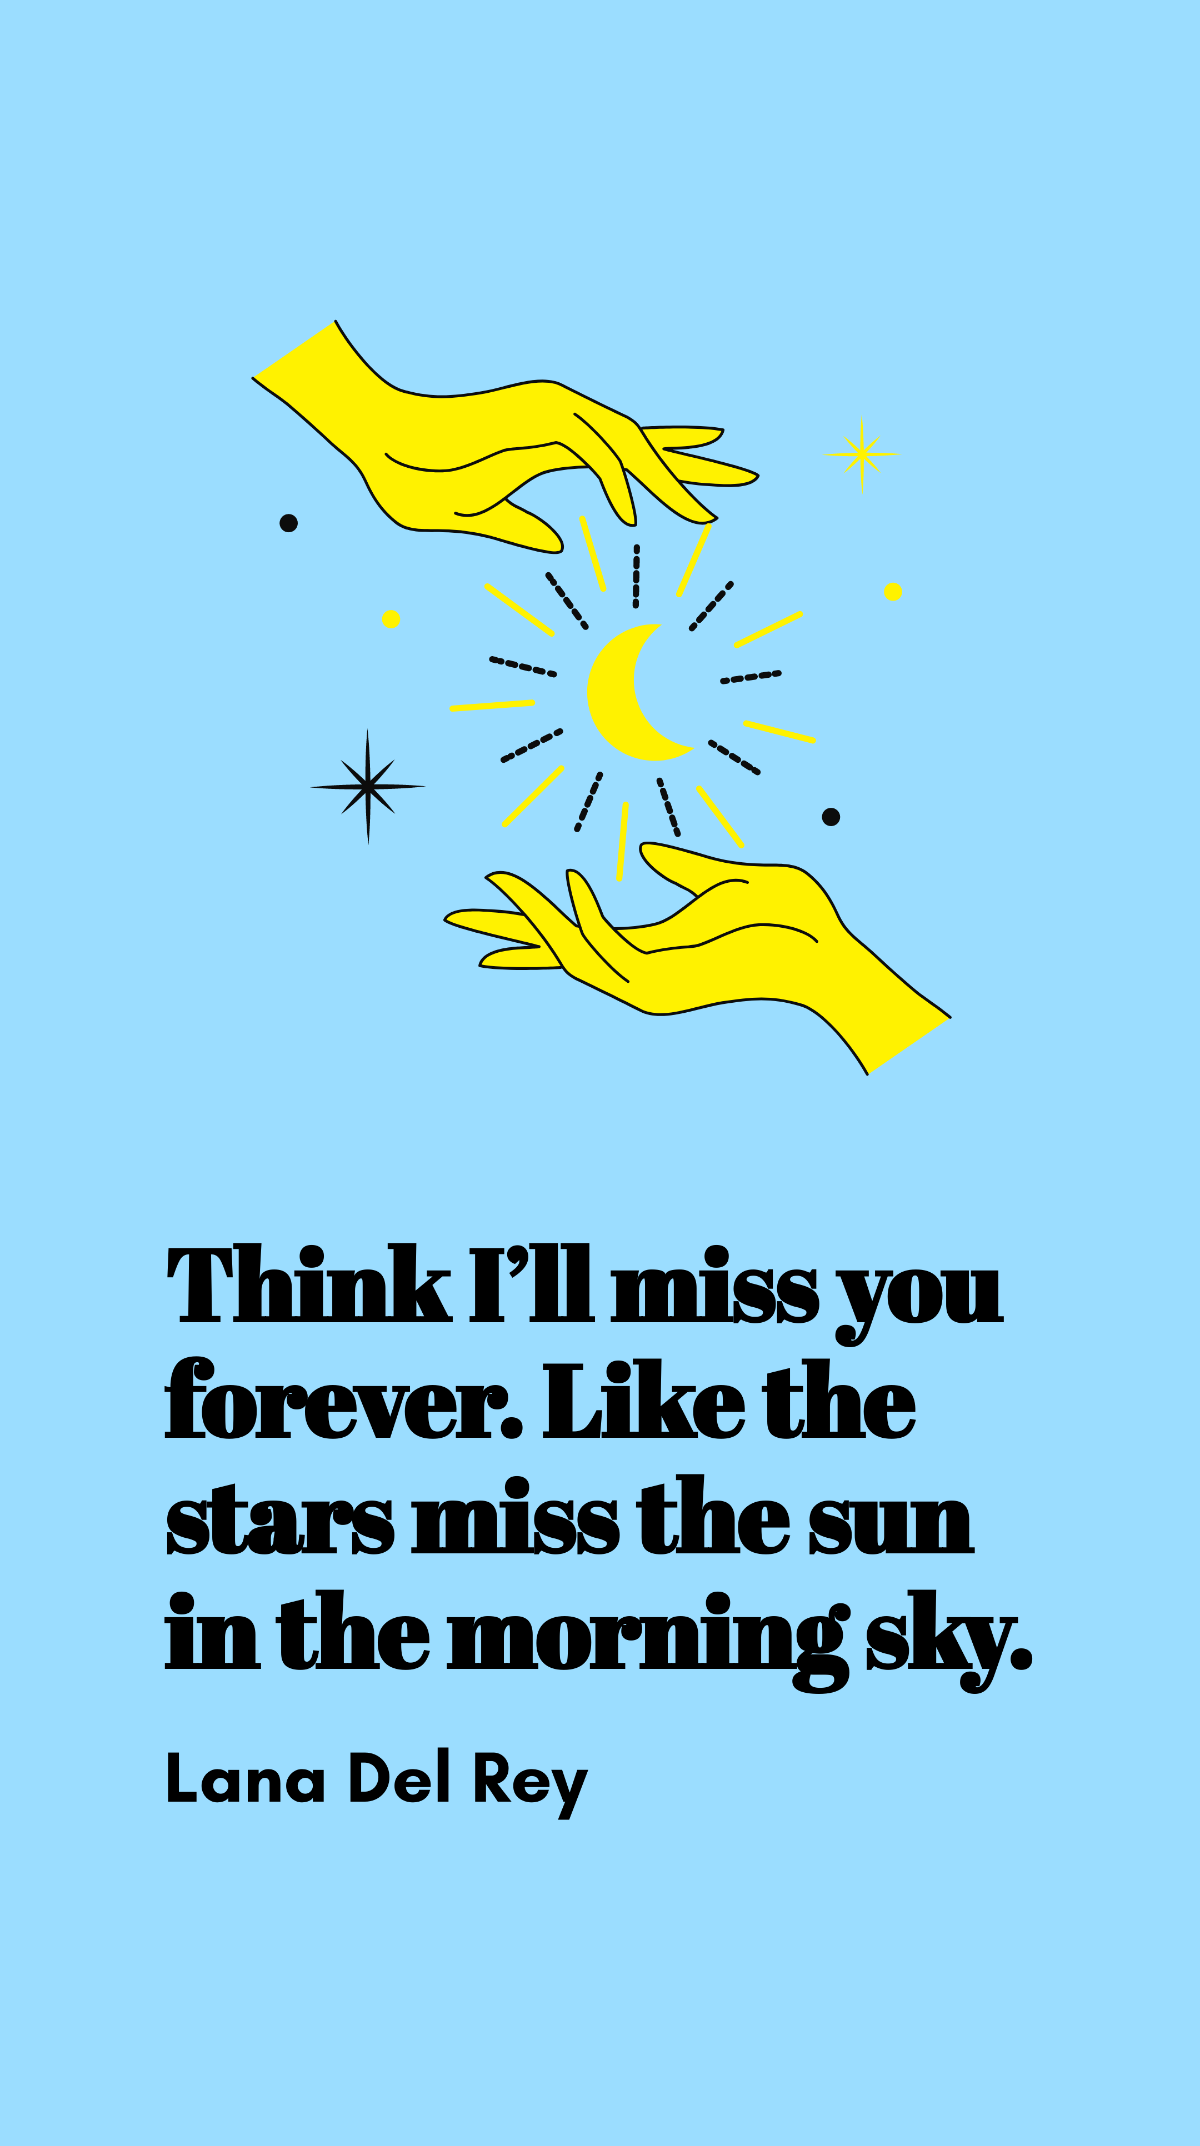 Lana Del Rey - Think I’ll miss you forever. Like the stars miss the sun in the morning sky. Template